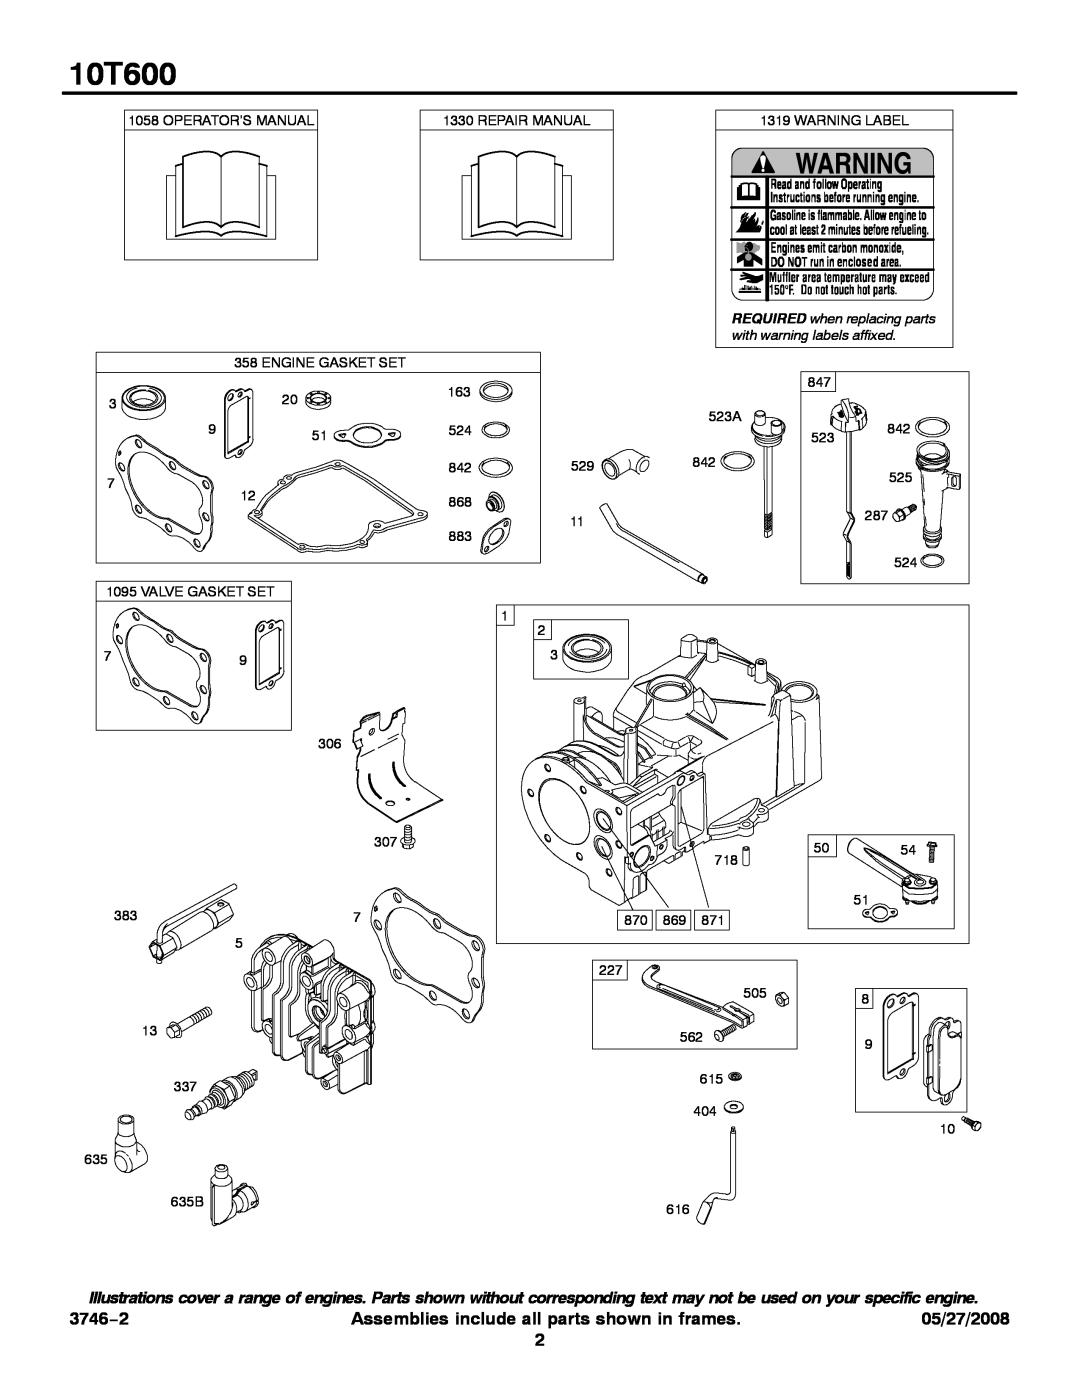 Briggs & Stratton 10T600 3746−2, Assemblies include all parts shown in frames, 05/27/2008, REQUIRED when replacing parts 